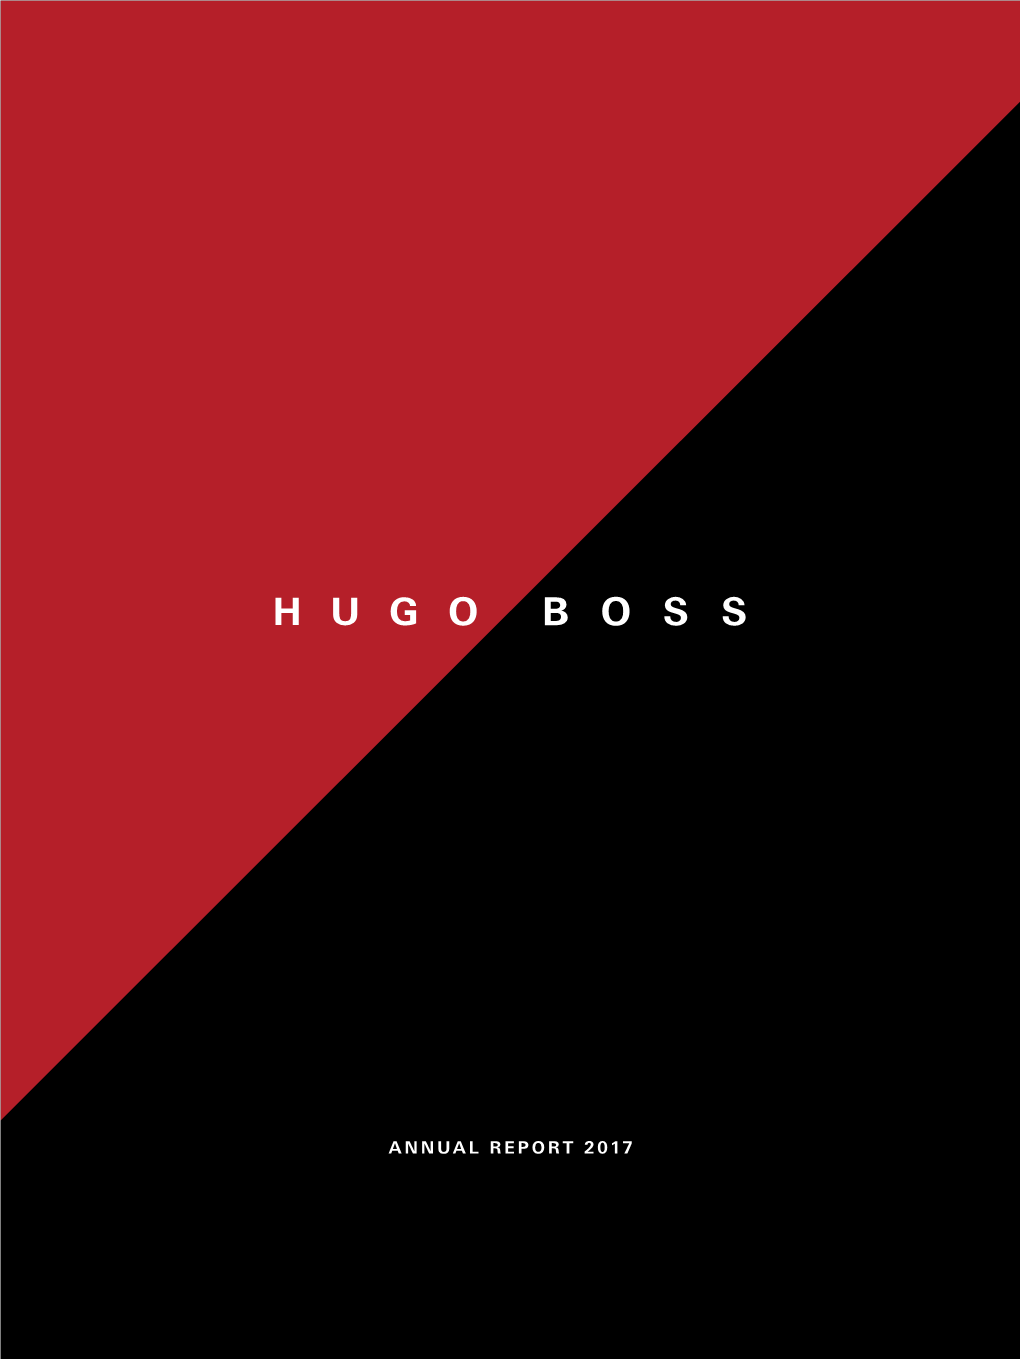 Annual Report 2017 Hugo Boss at a Glance